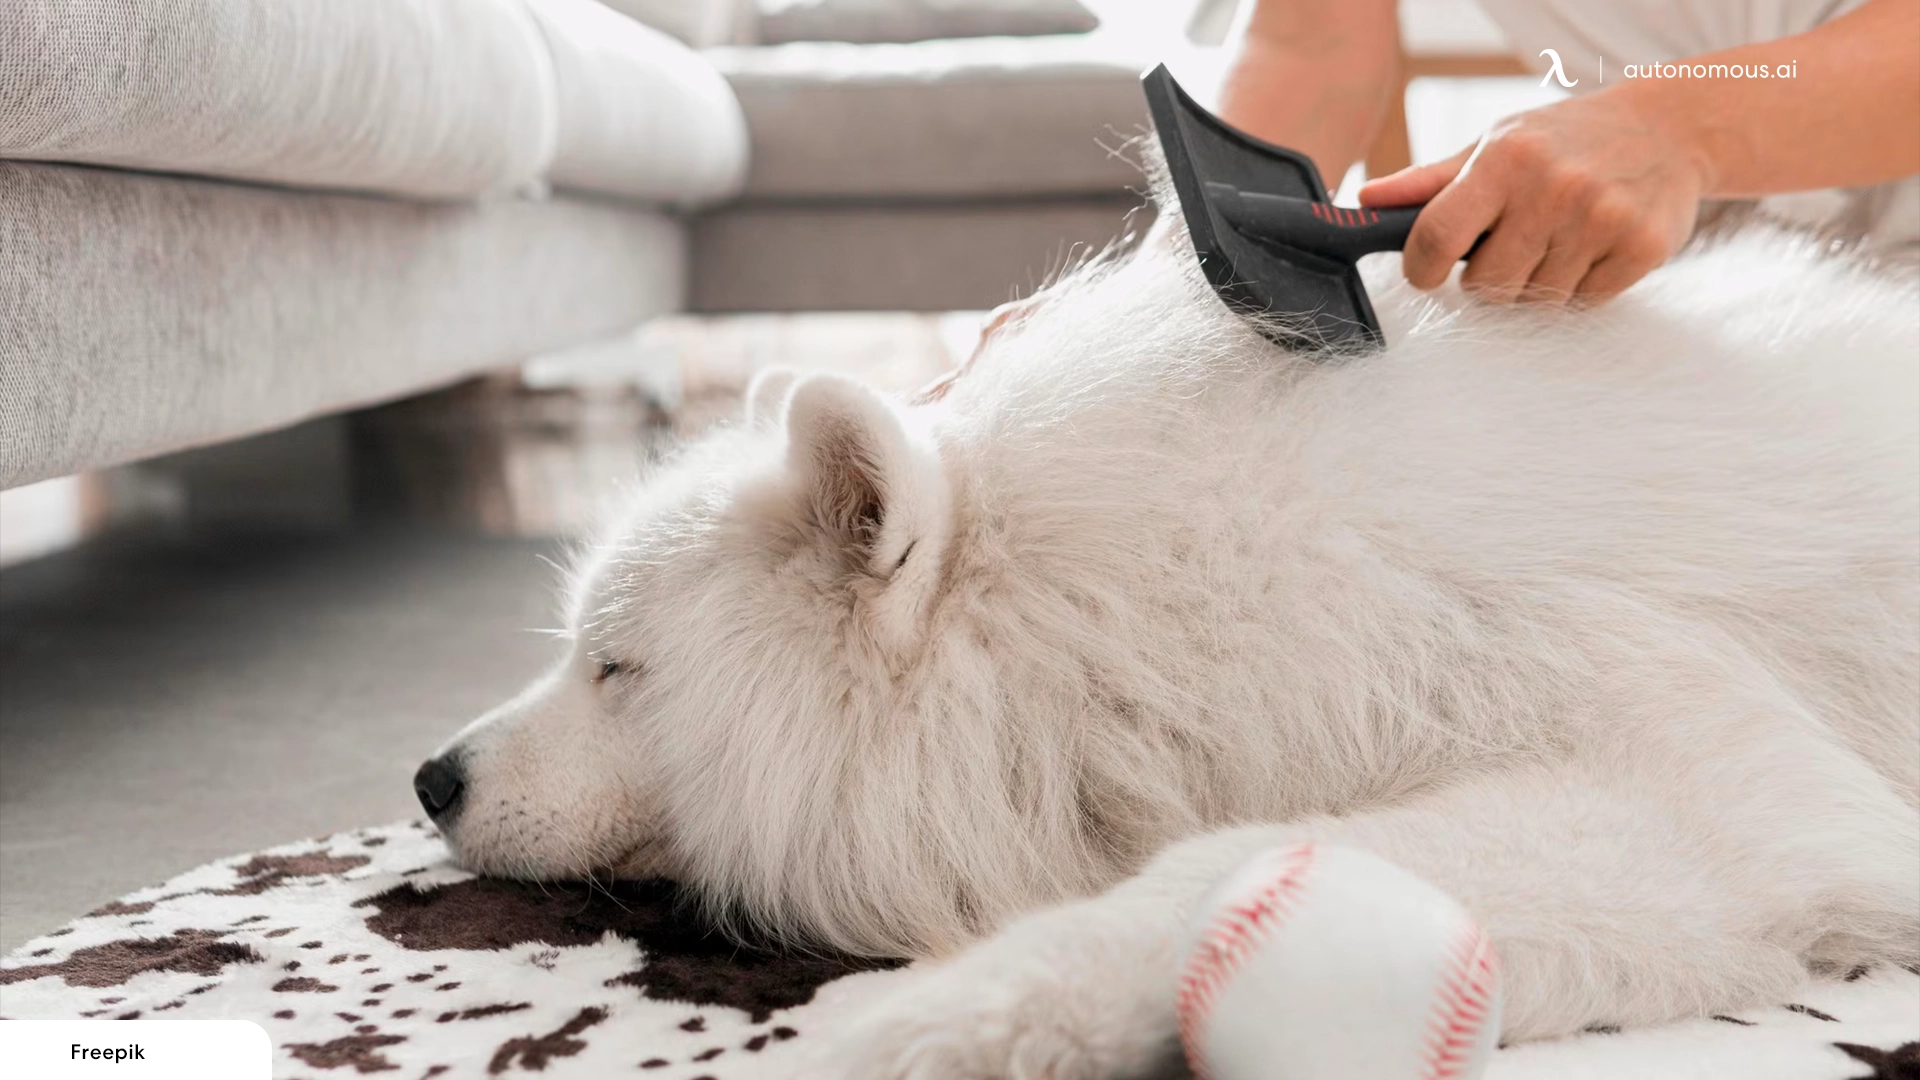 Regular Grooming Is a Must - furniture protection from dogs